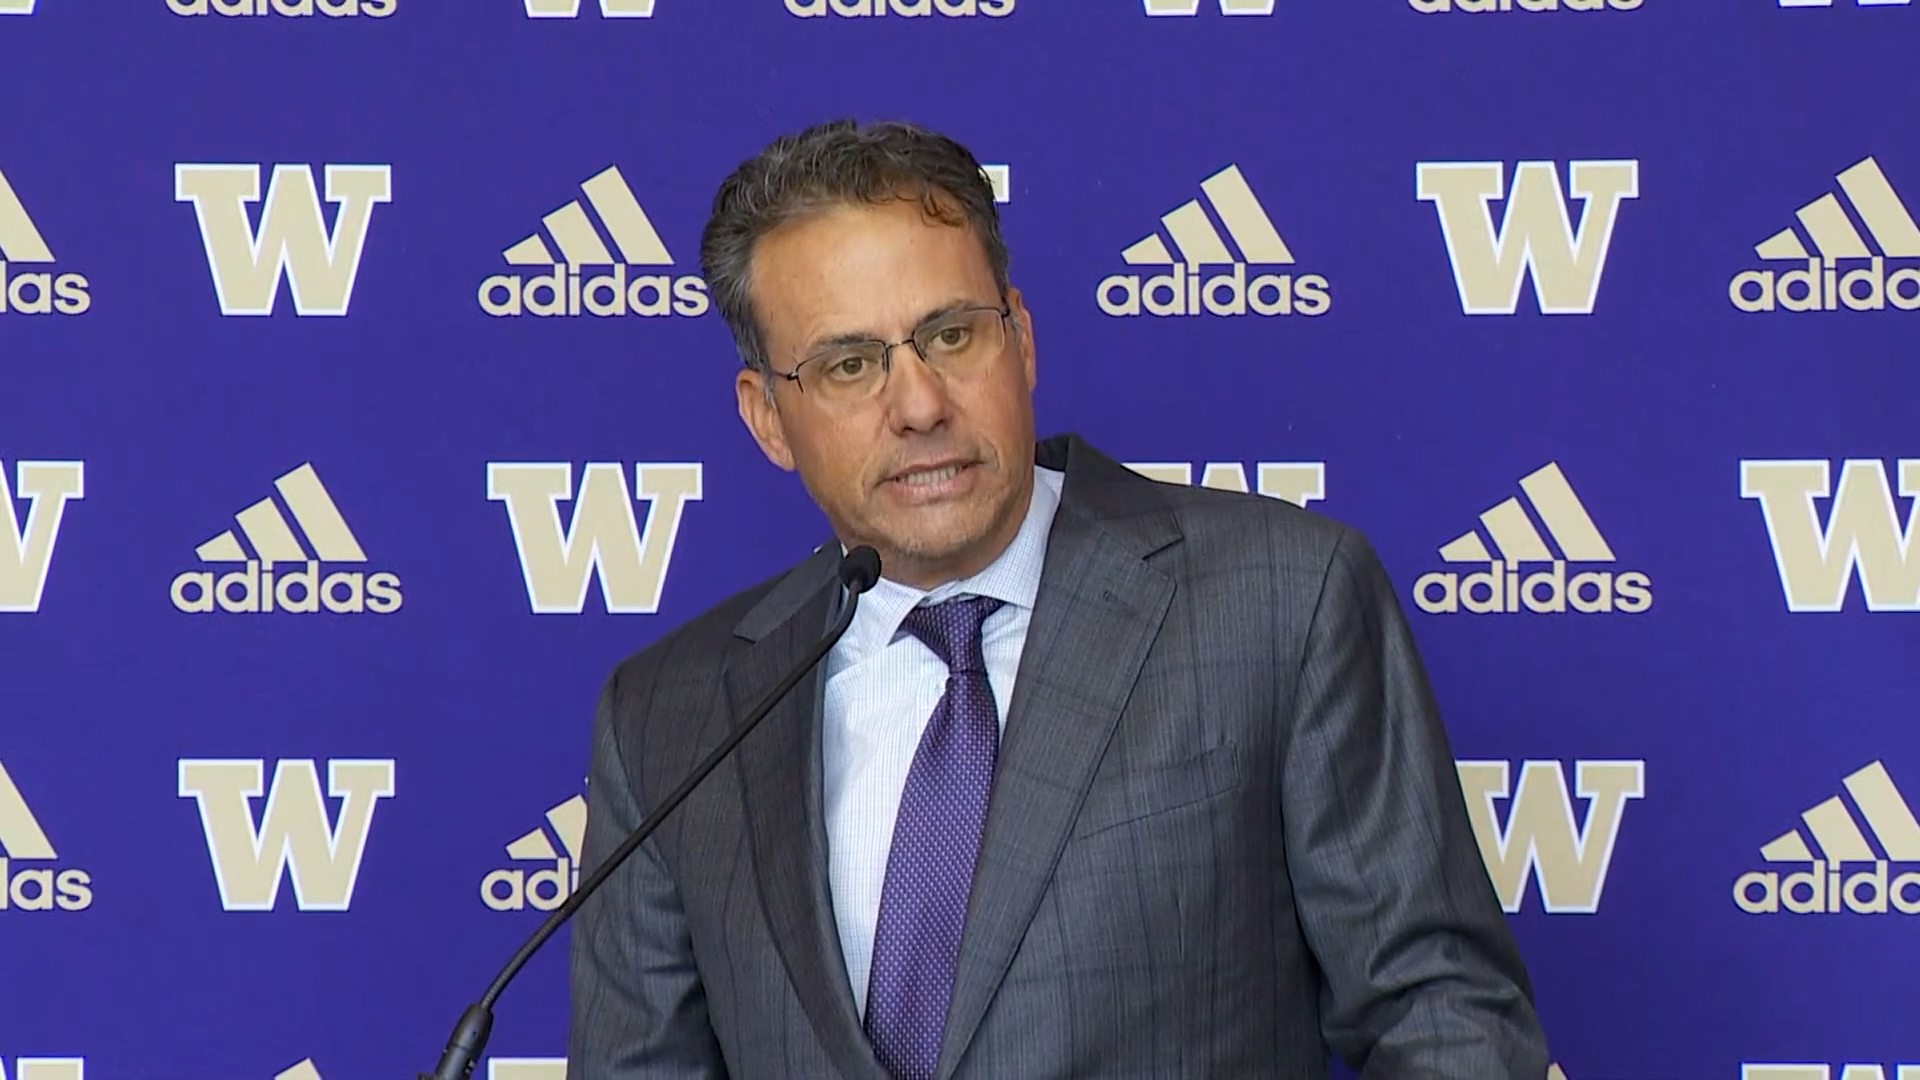 Fisch comes to Washington from the University of Arizona, where he coached for the past three seasons.